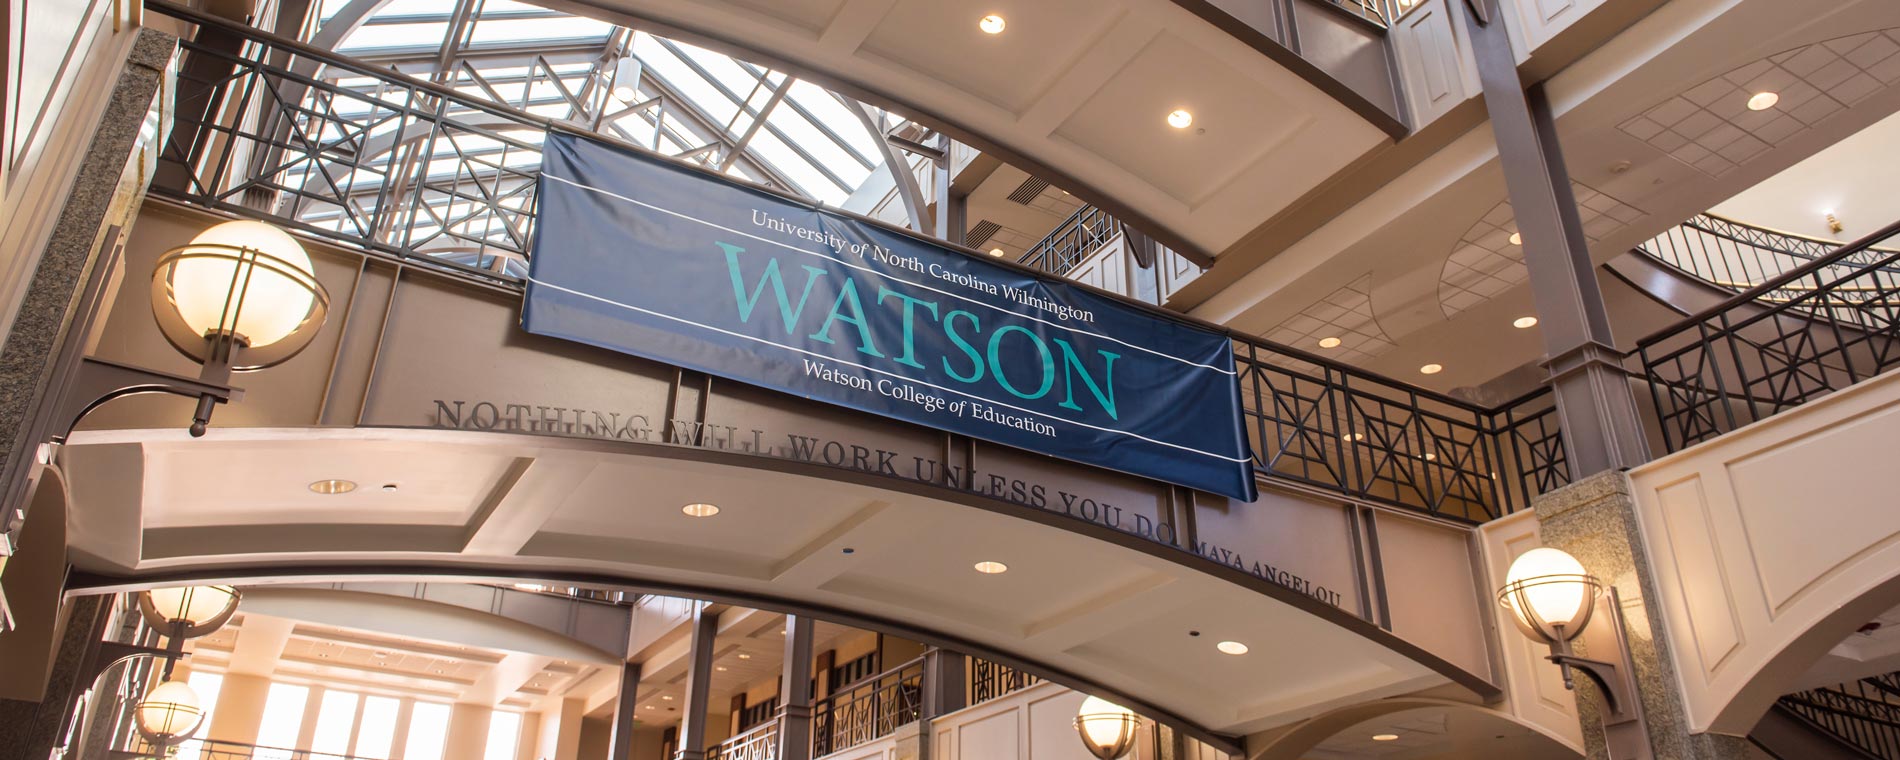 Interior of Watson College of Education